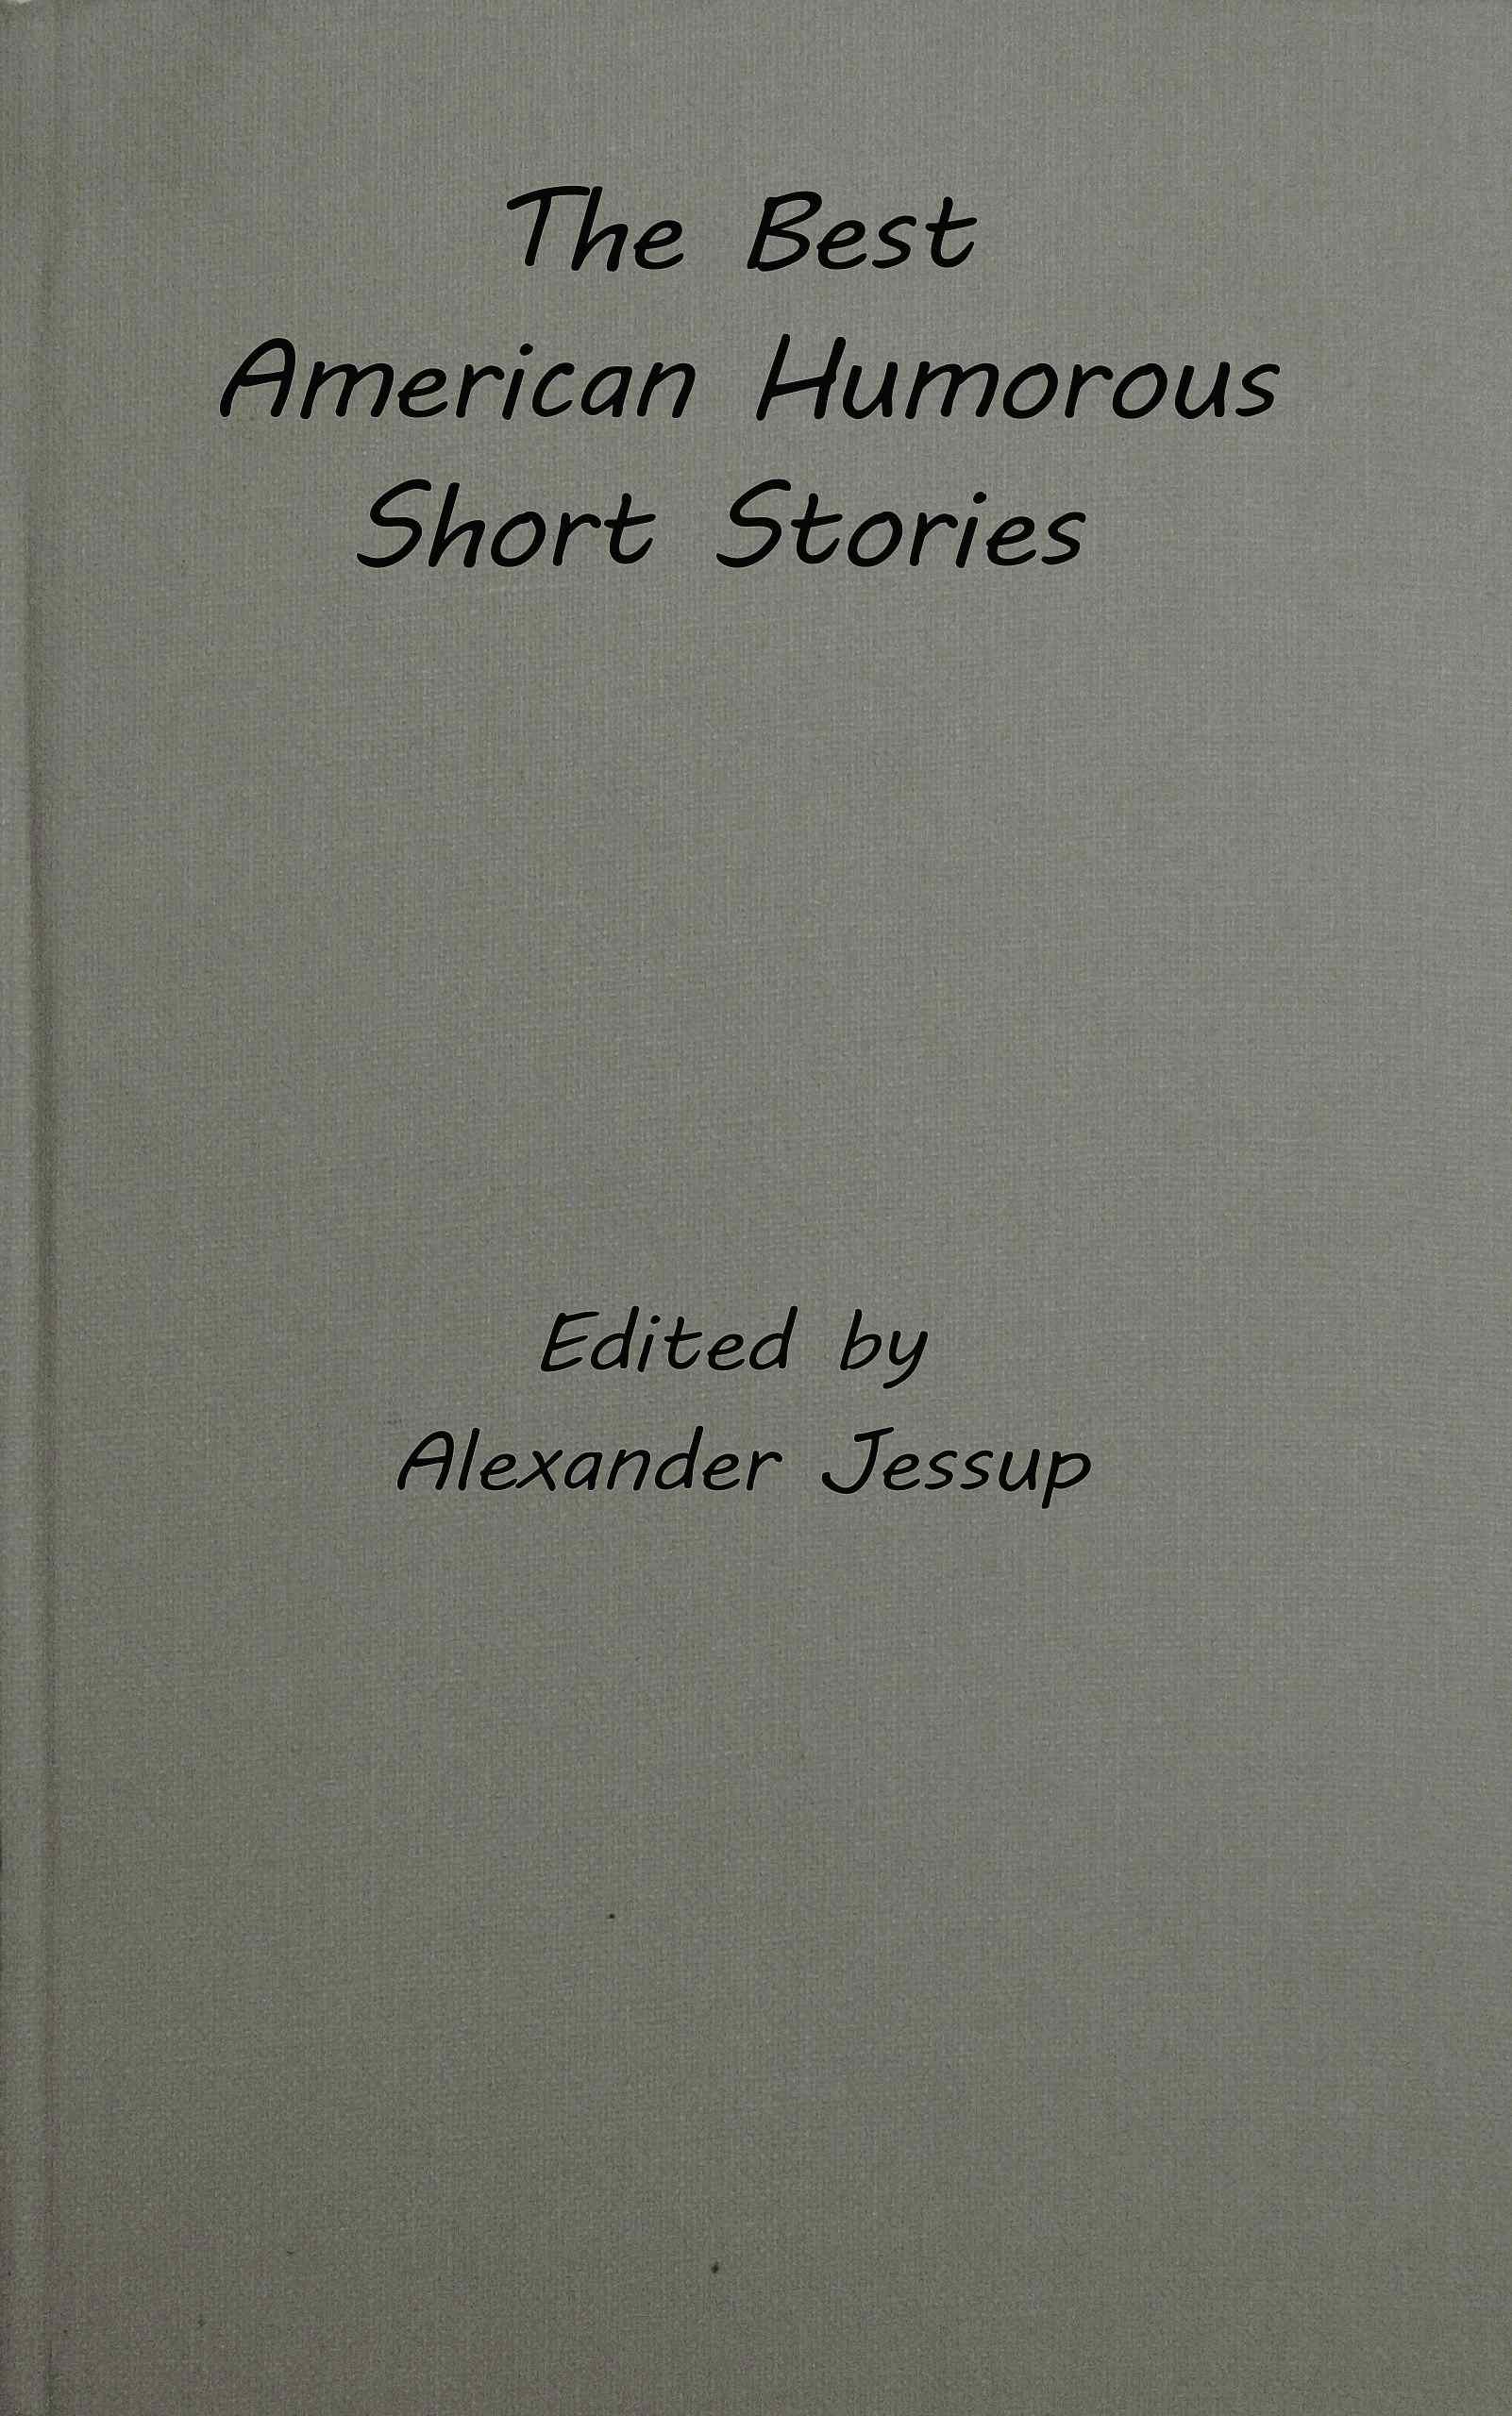 The best American humorous short stories, by Various—A Project Gutenberg  eBook